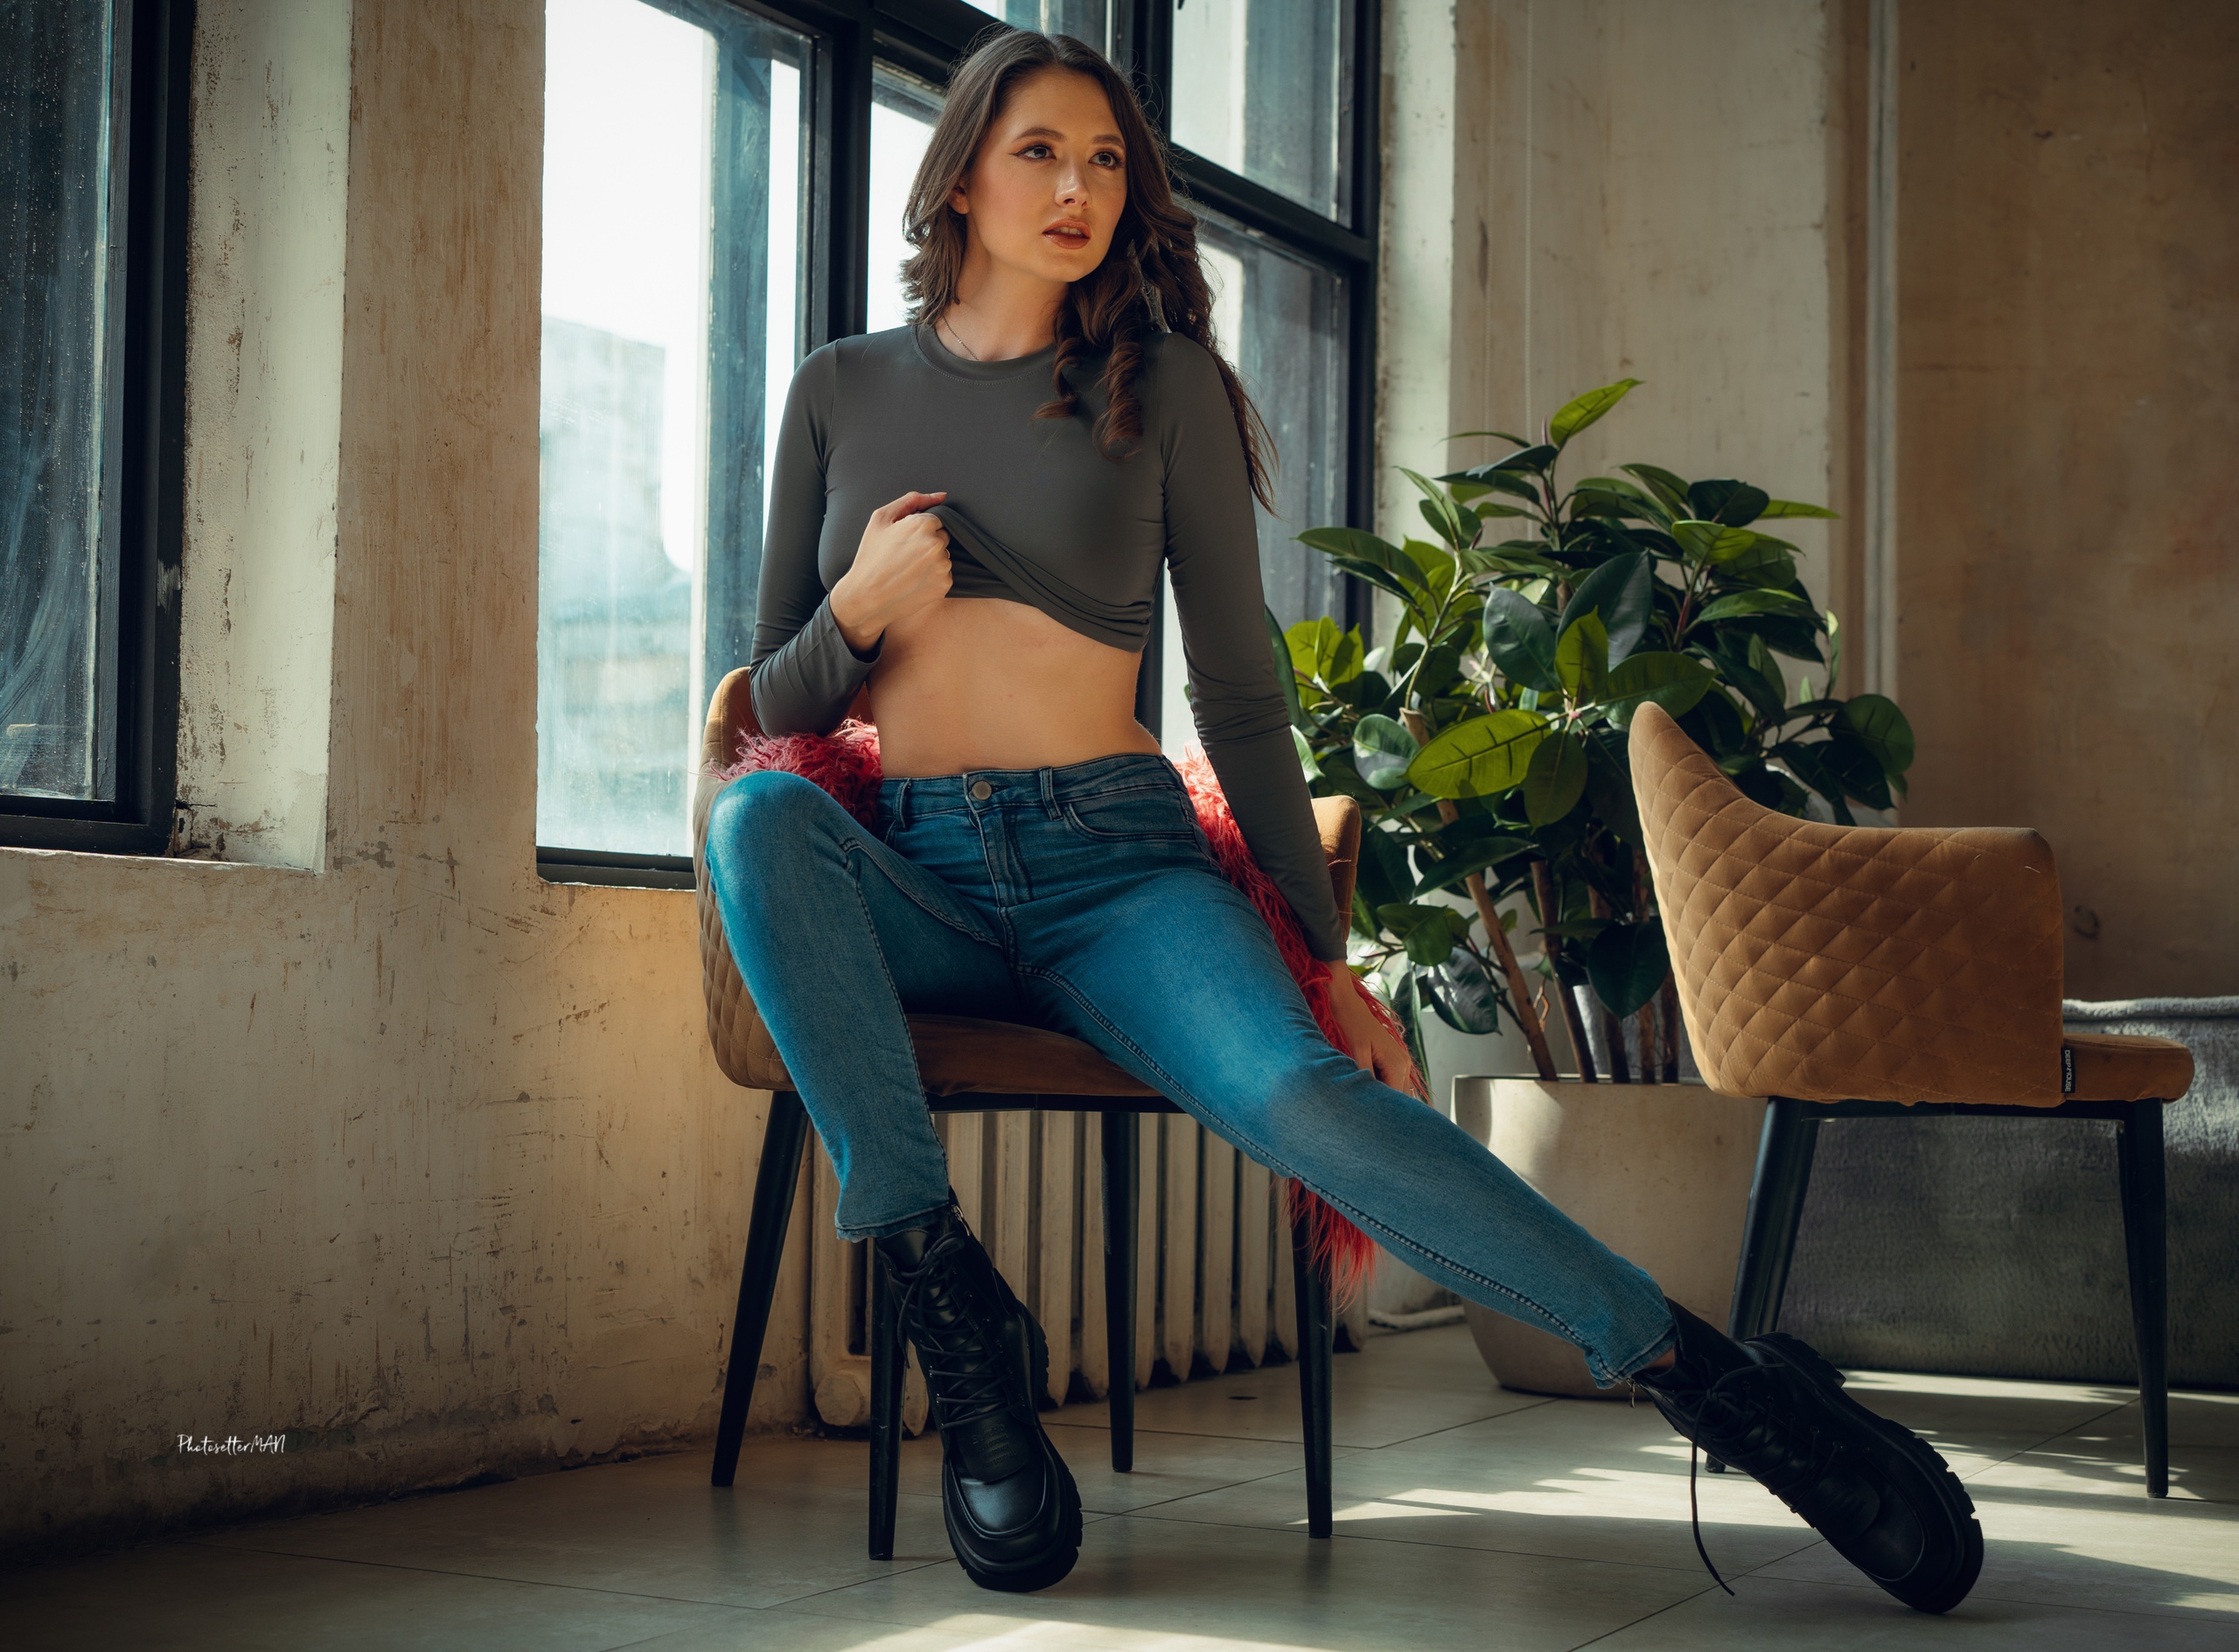 People 2560x1889 Alexander Nikolsky model Disha Shemetova jeans women makeup women indoors boots brunette by the window sitting red lipstick whole body frontal view indoors sitting on chair looking away parted lips spread legs long hair signature leaves grey tops lifting shirt